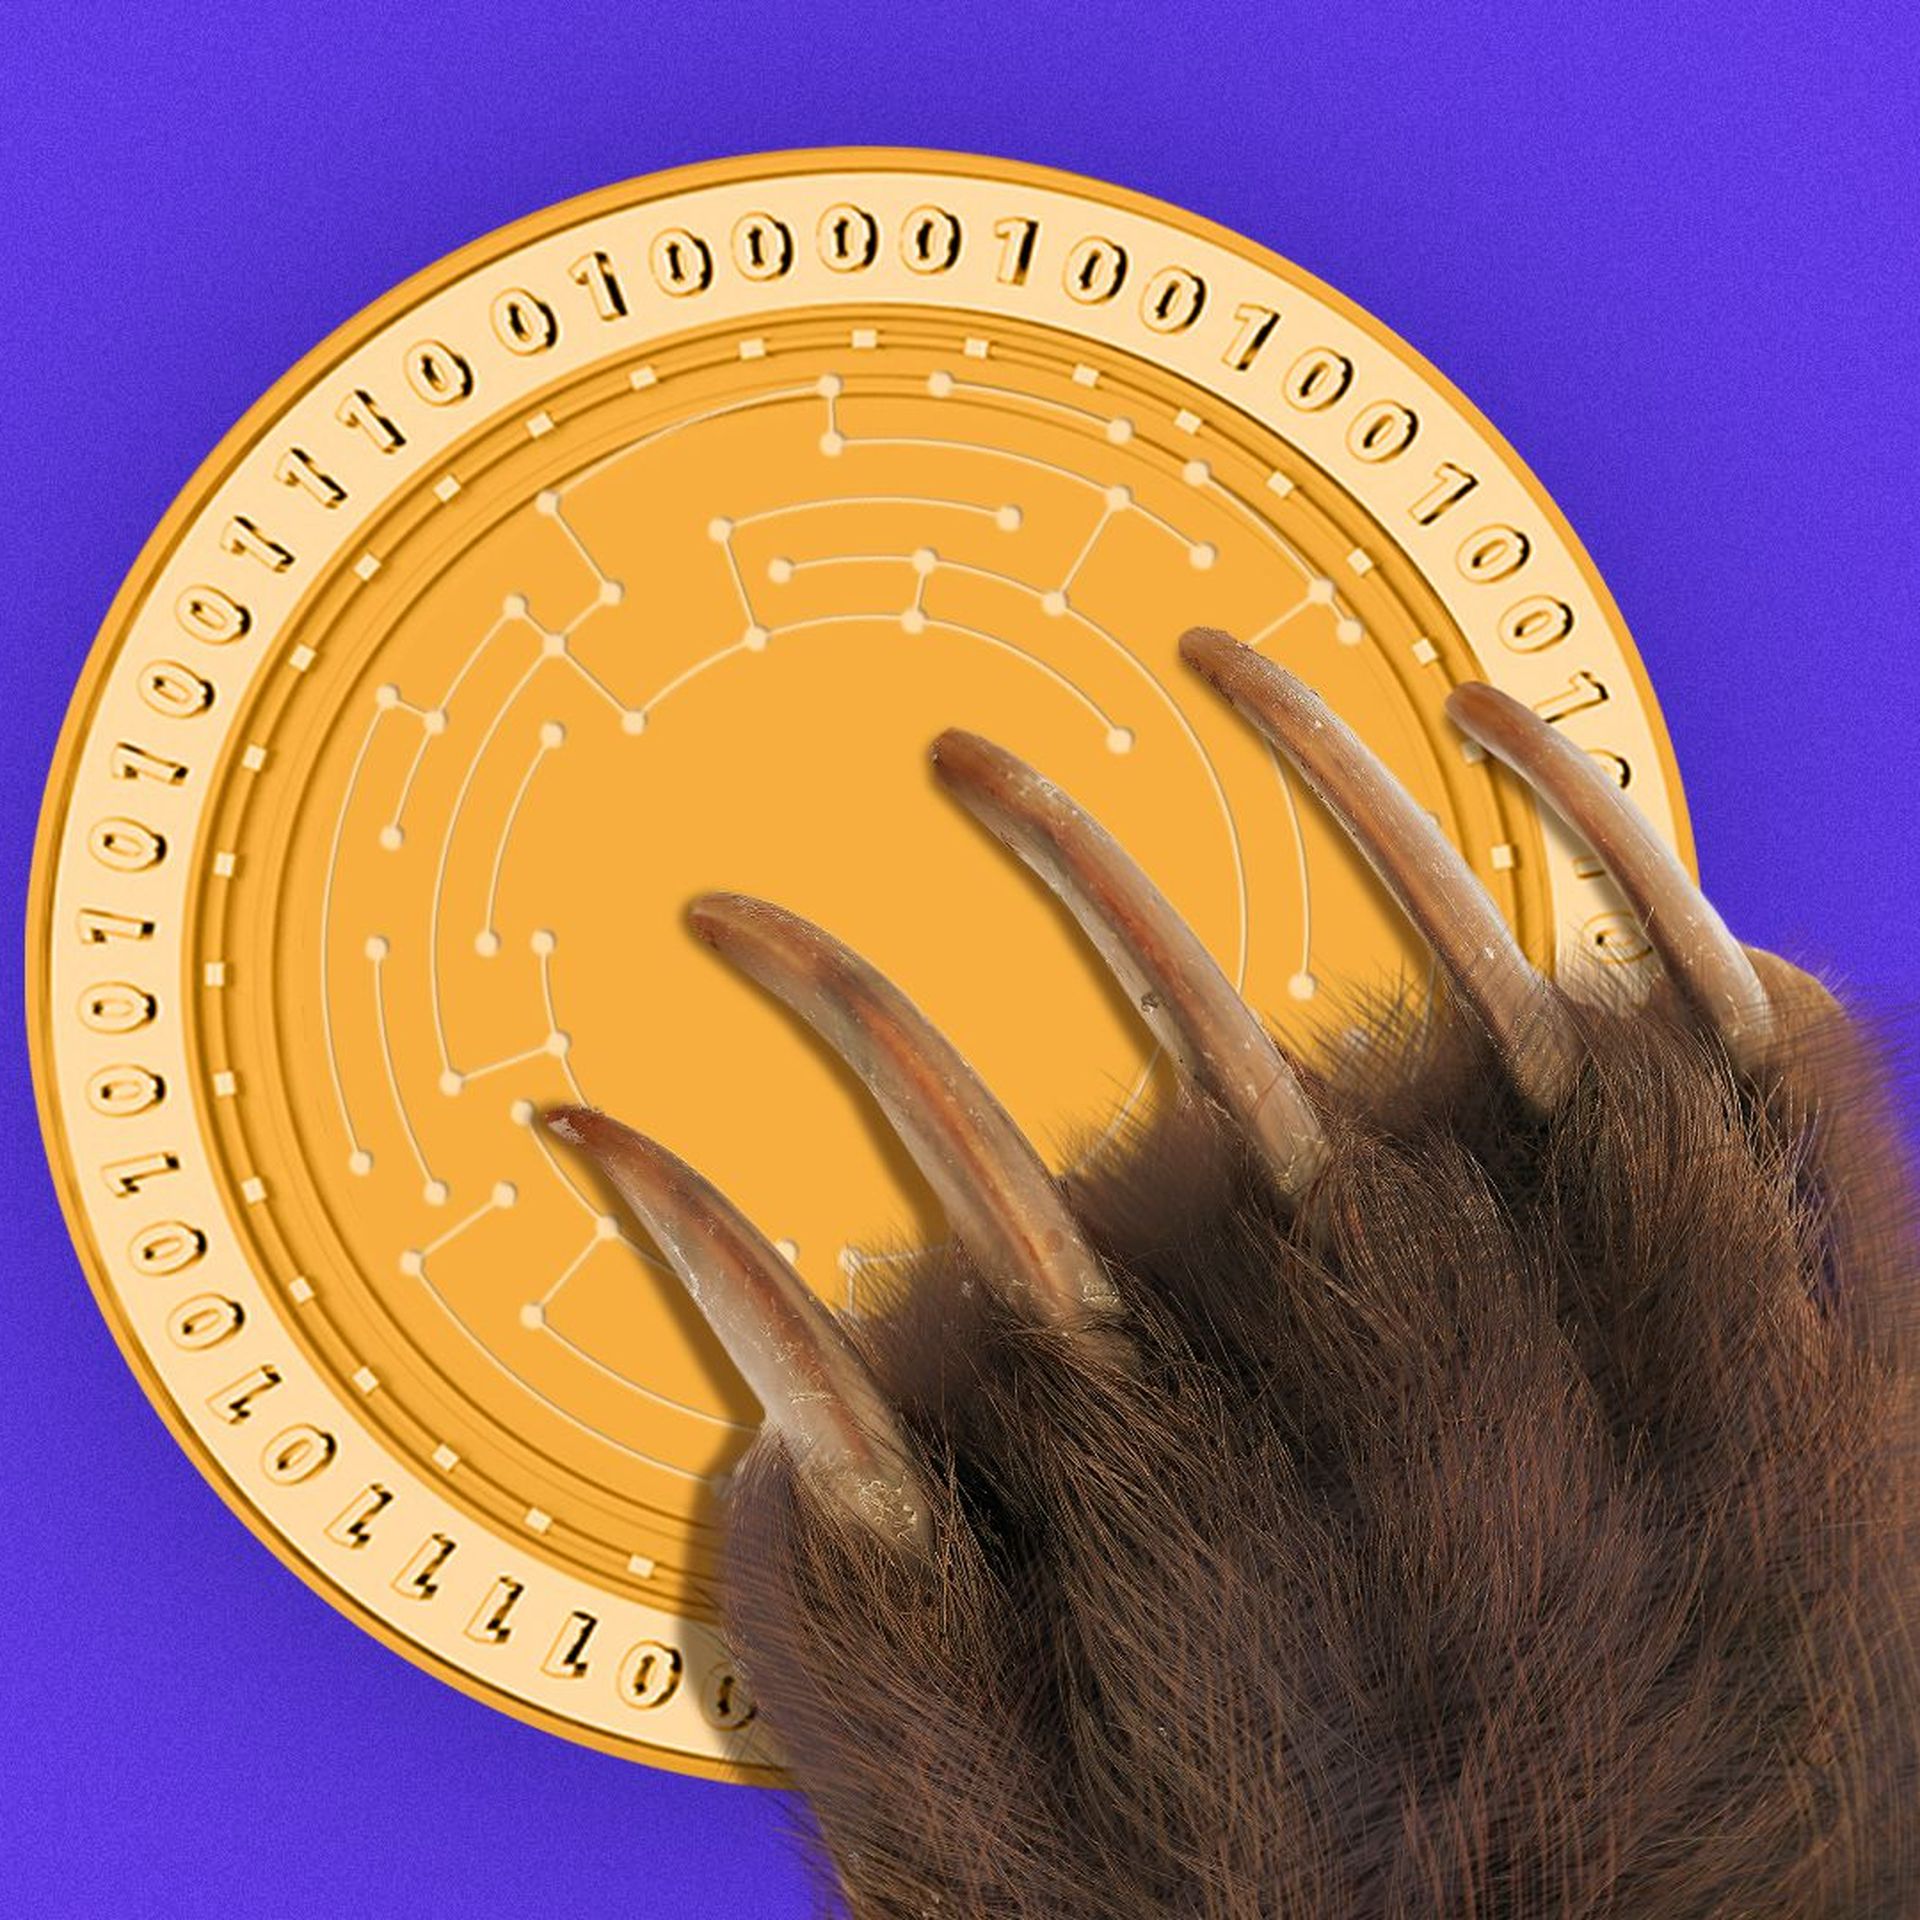 Illustration of a bear claw holding a crypto coin.